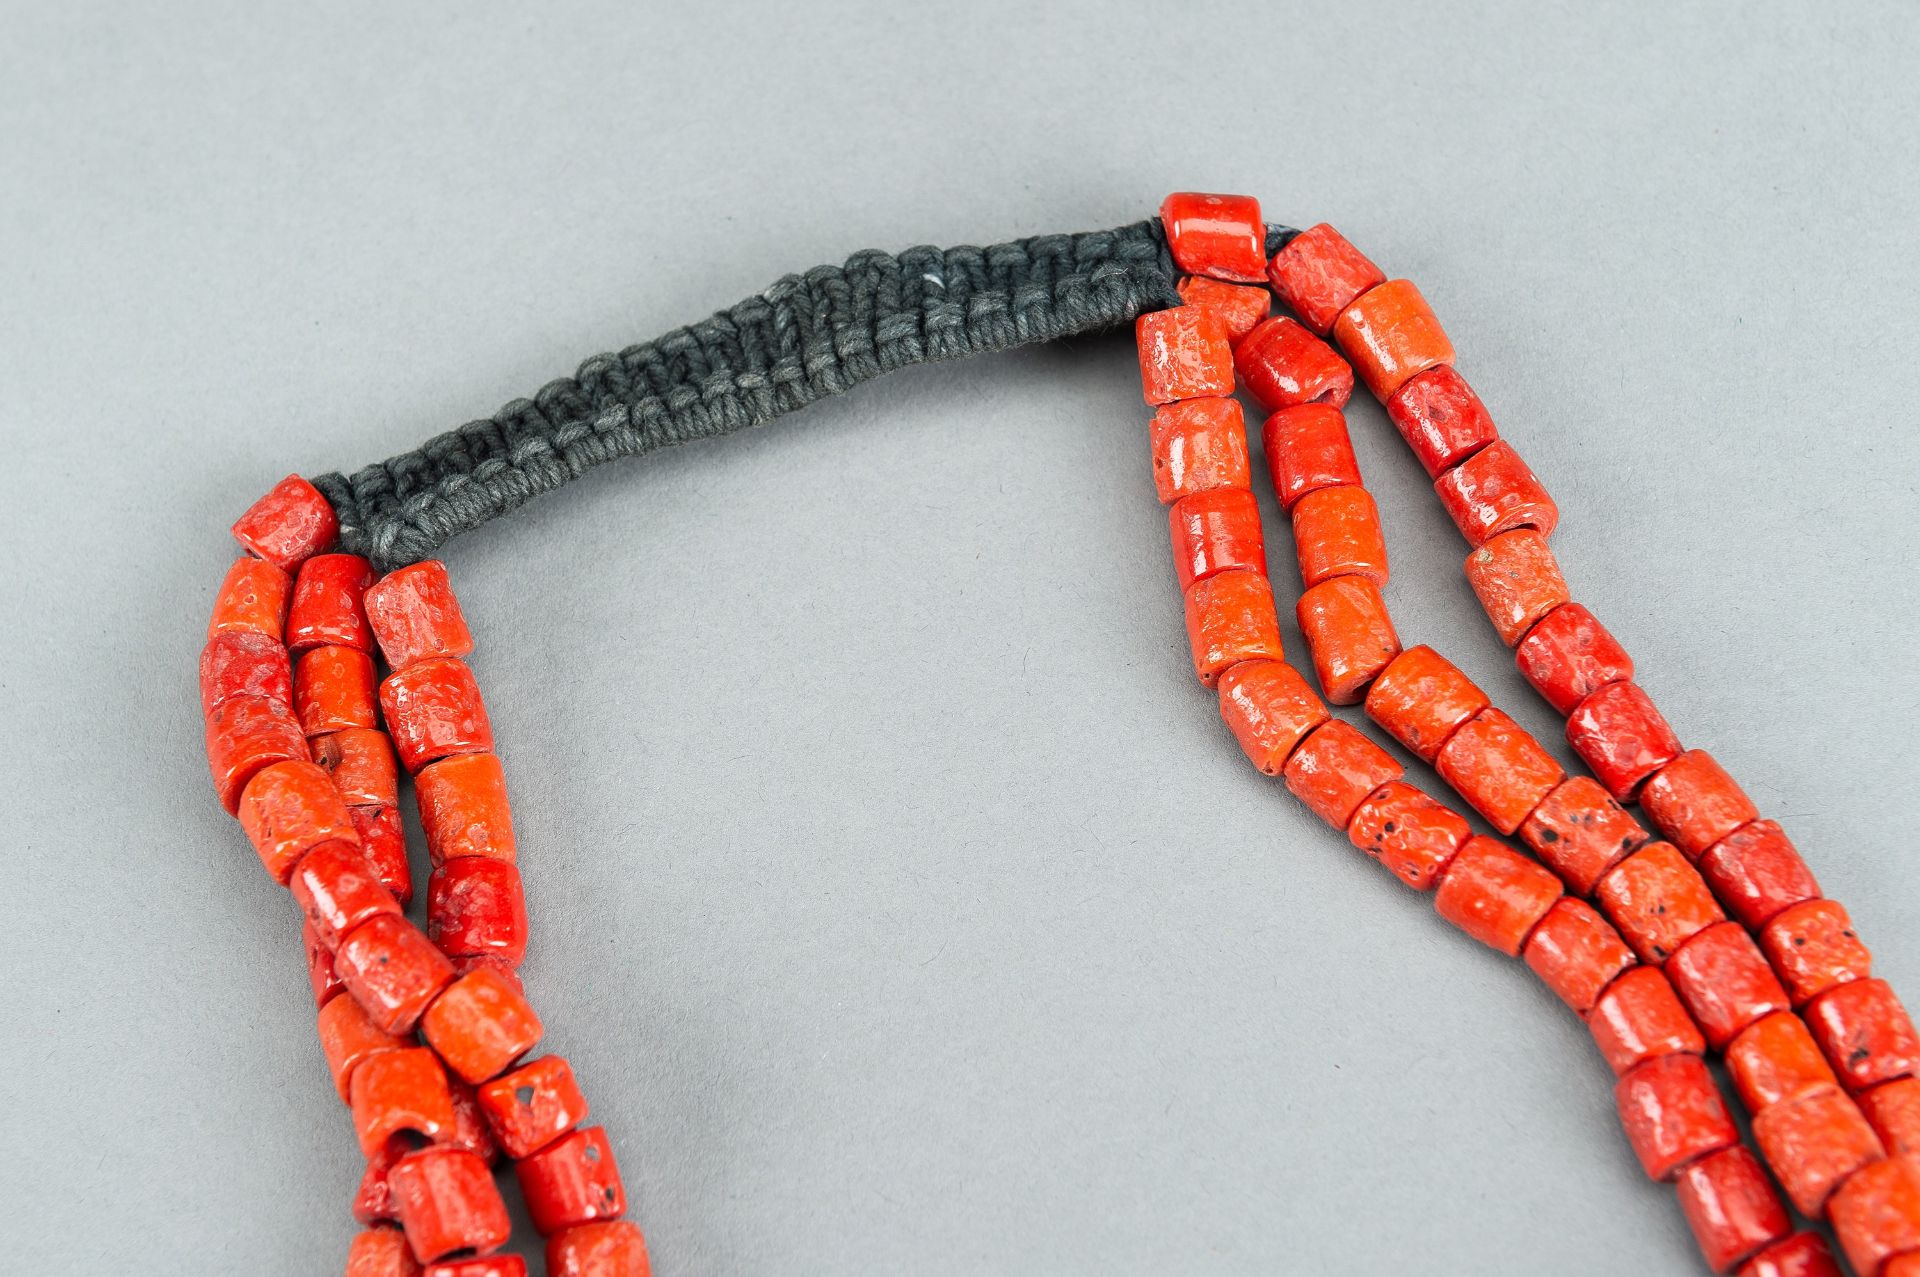 A NAGALAND 'CORAL' GLASS NECKLACE, c. 1900s - Image 9 of 9